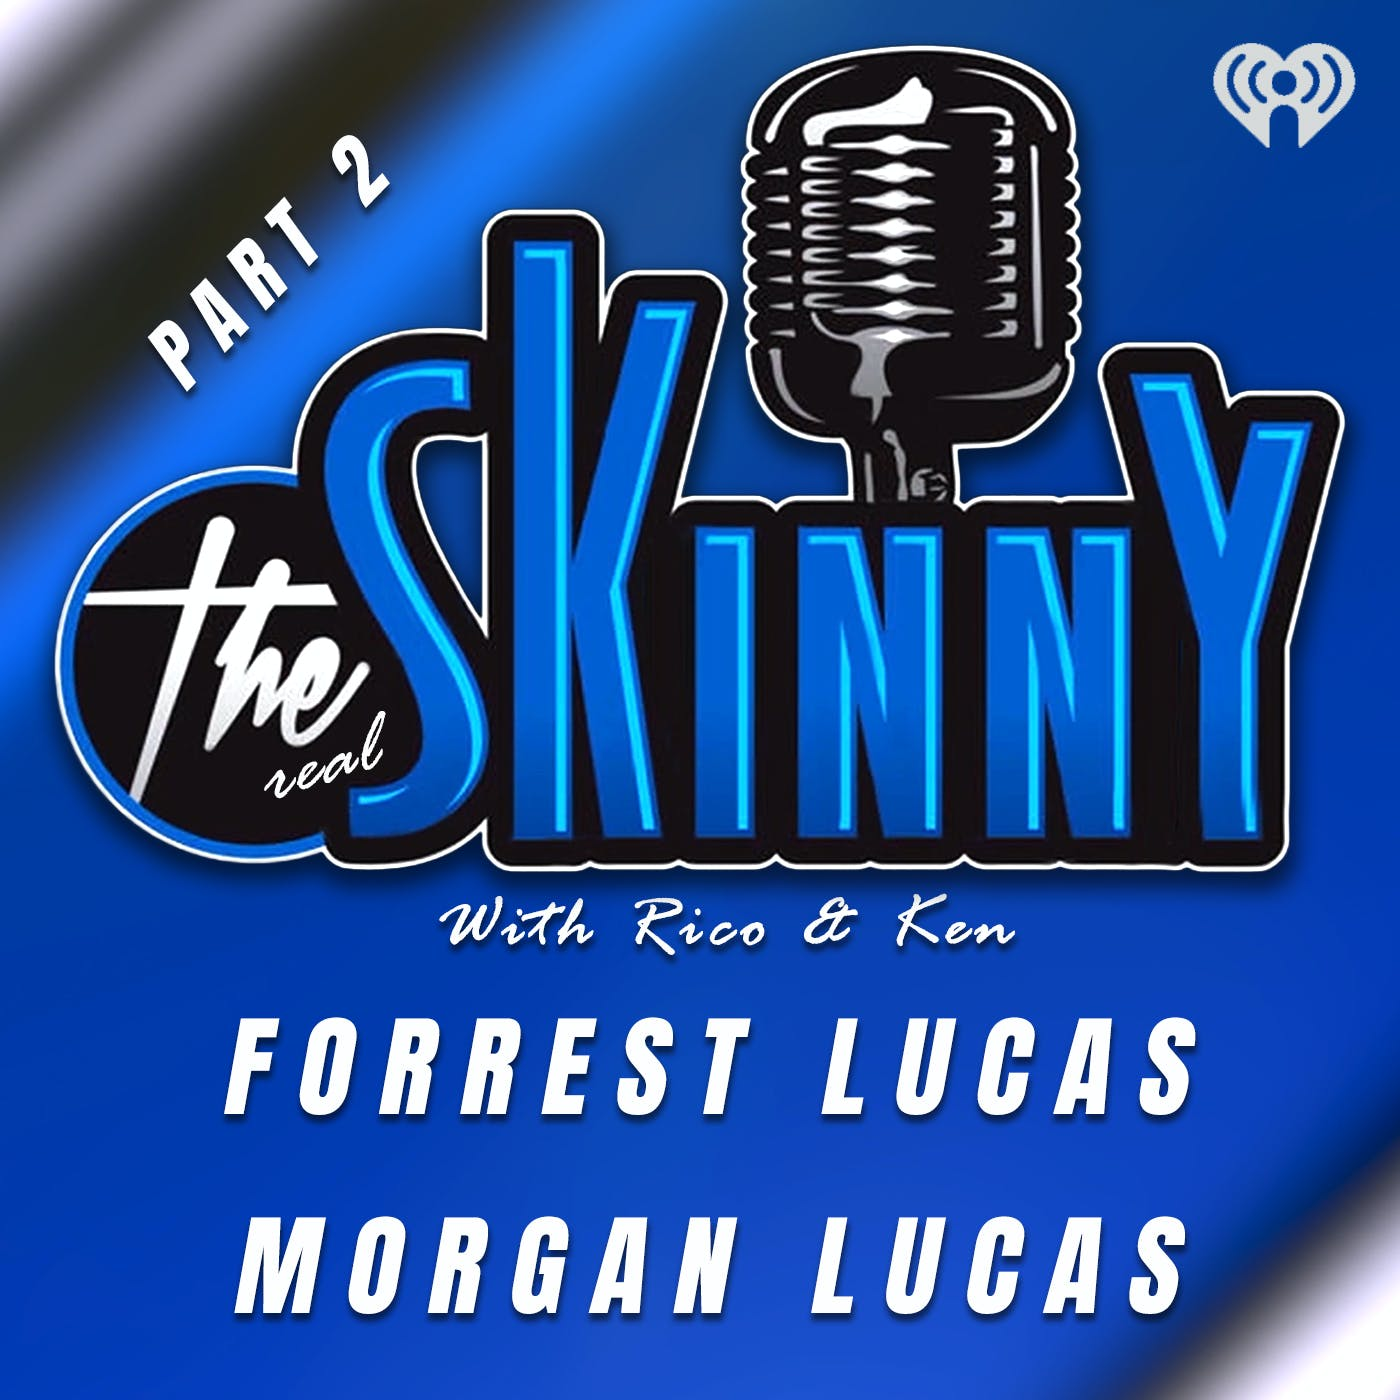 Part 2 of our exclusive conversation with Forrest Lucas and Morgan Lucas